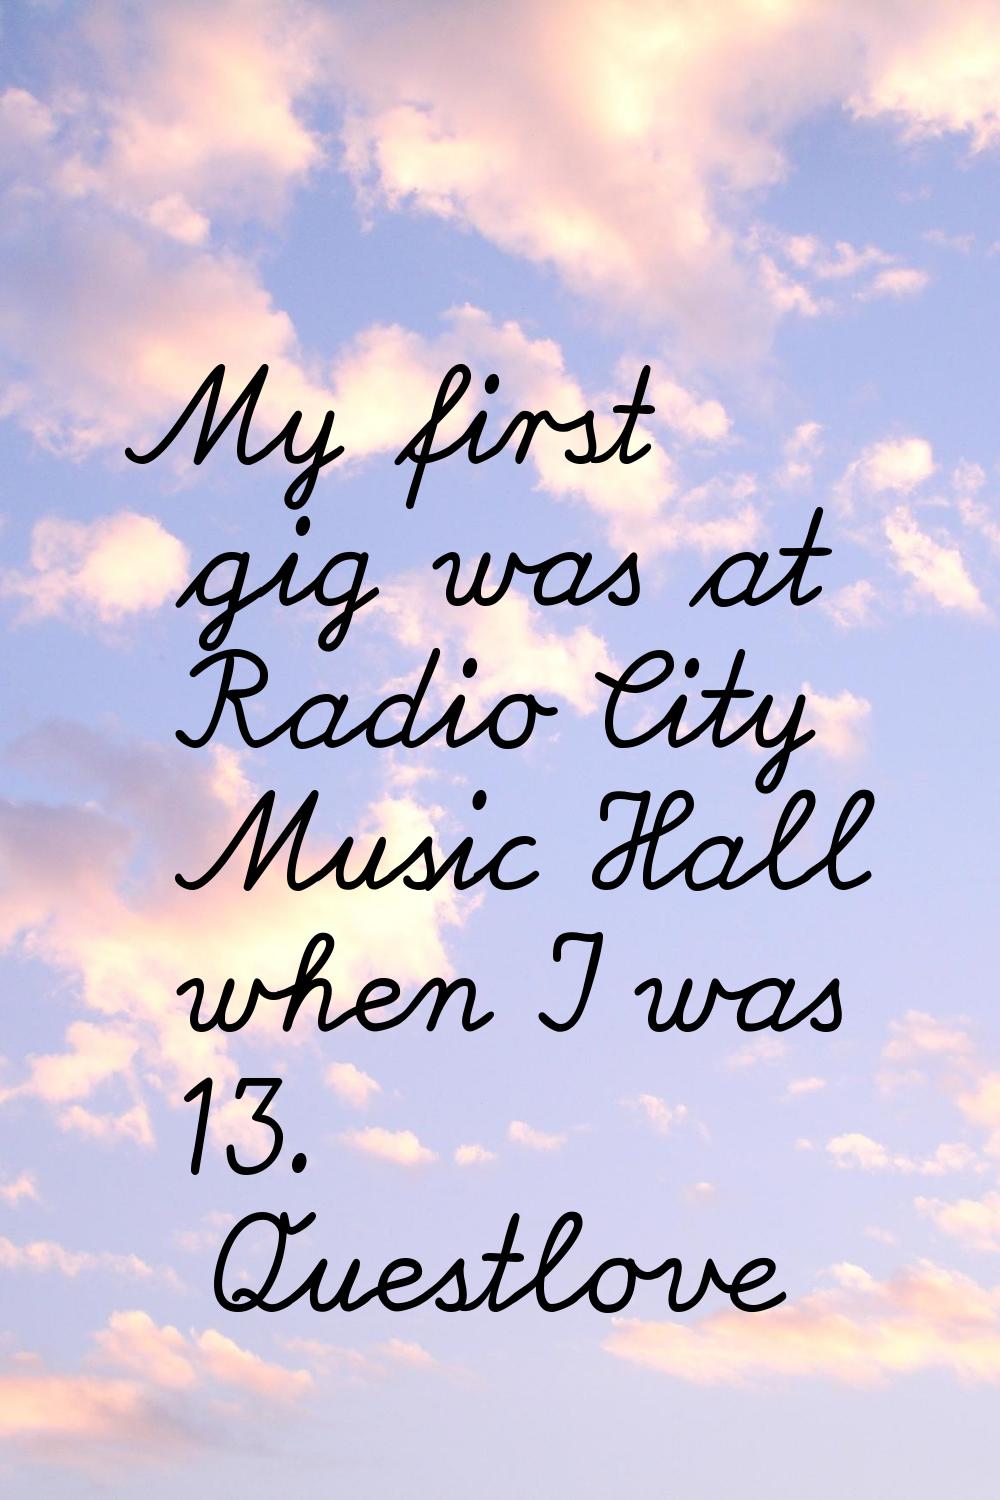 My first gig was at Radio City Music Hall when I was 13.